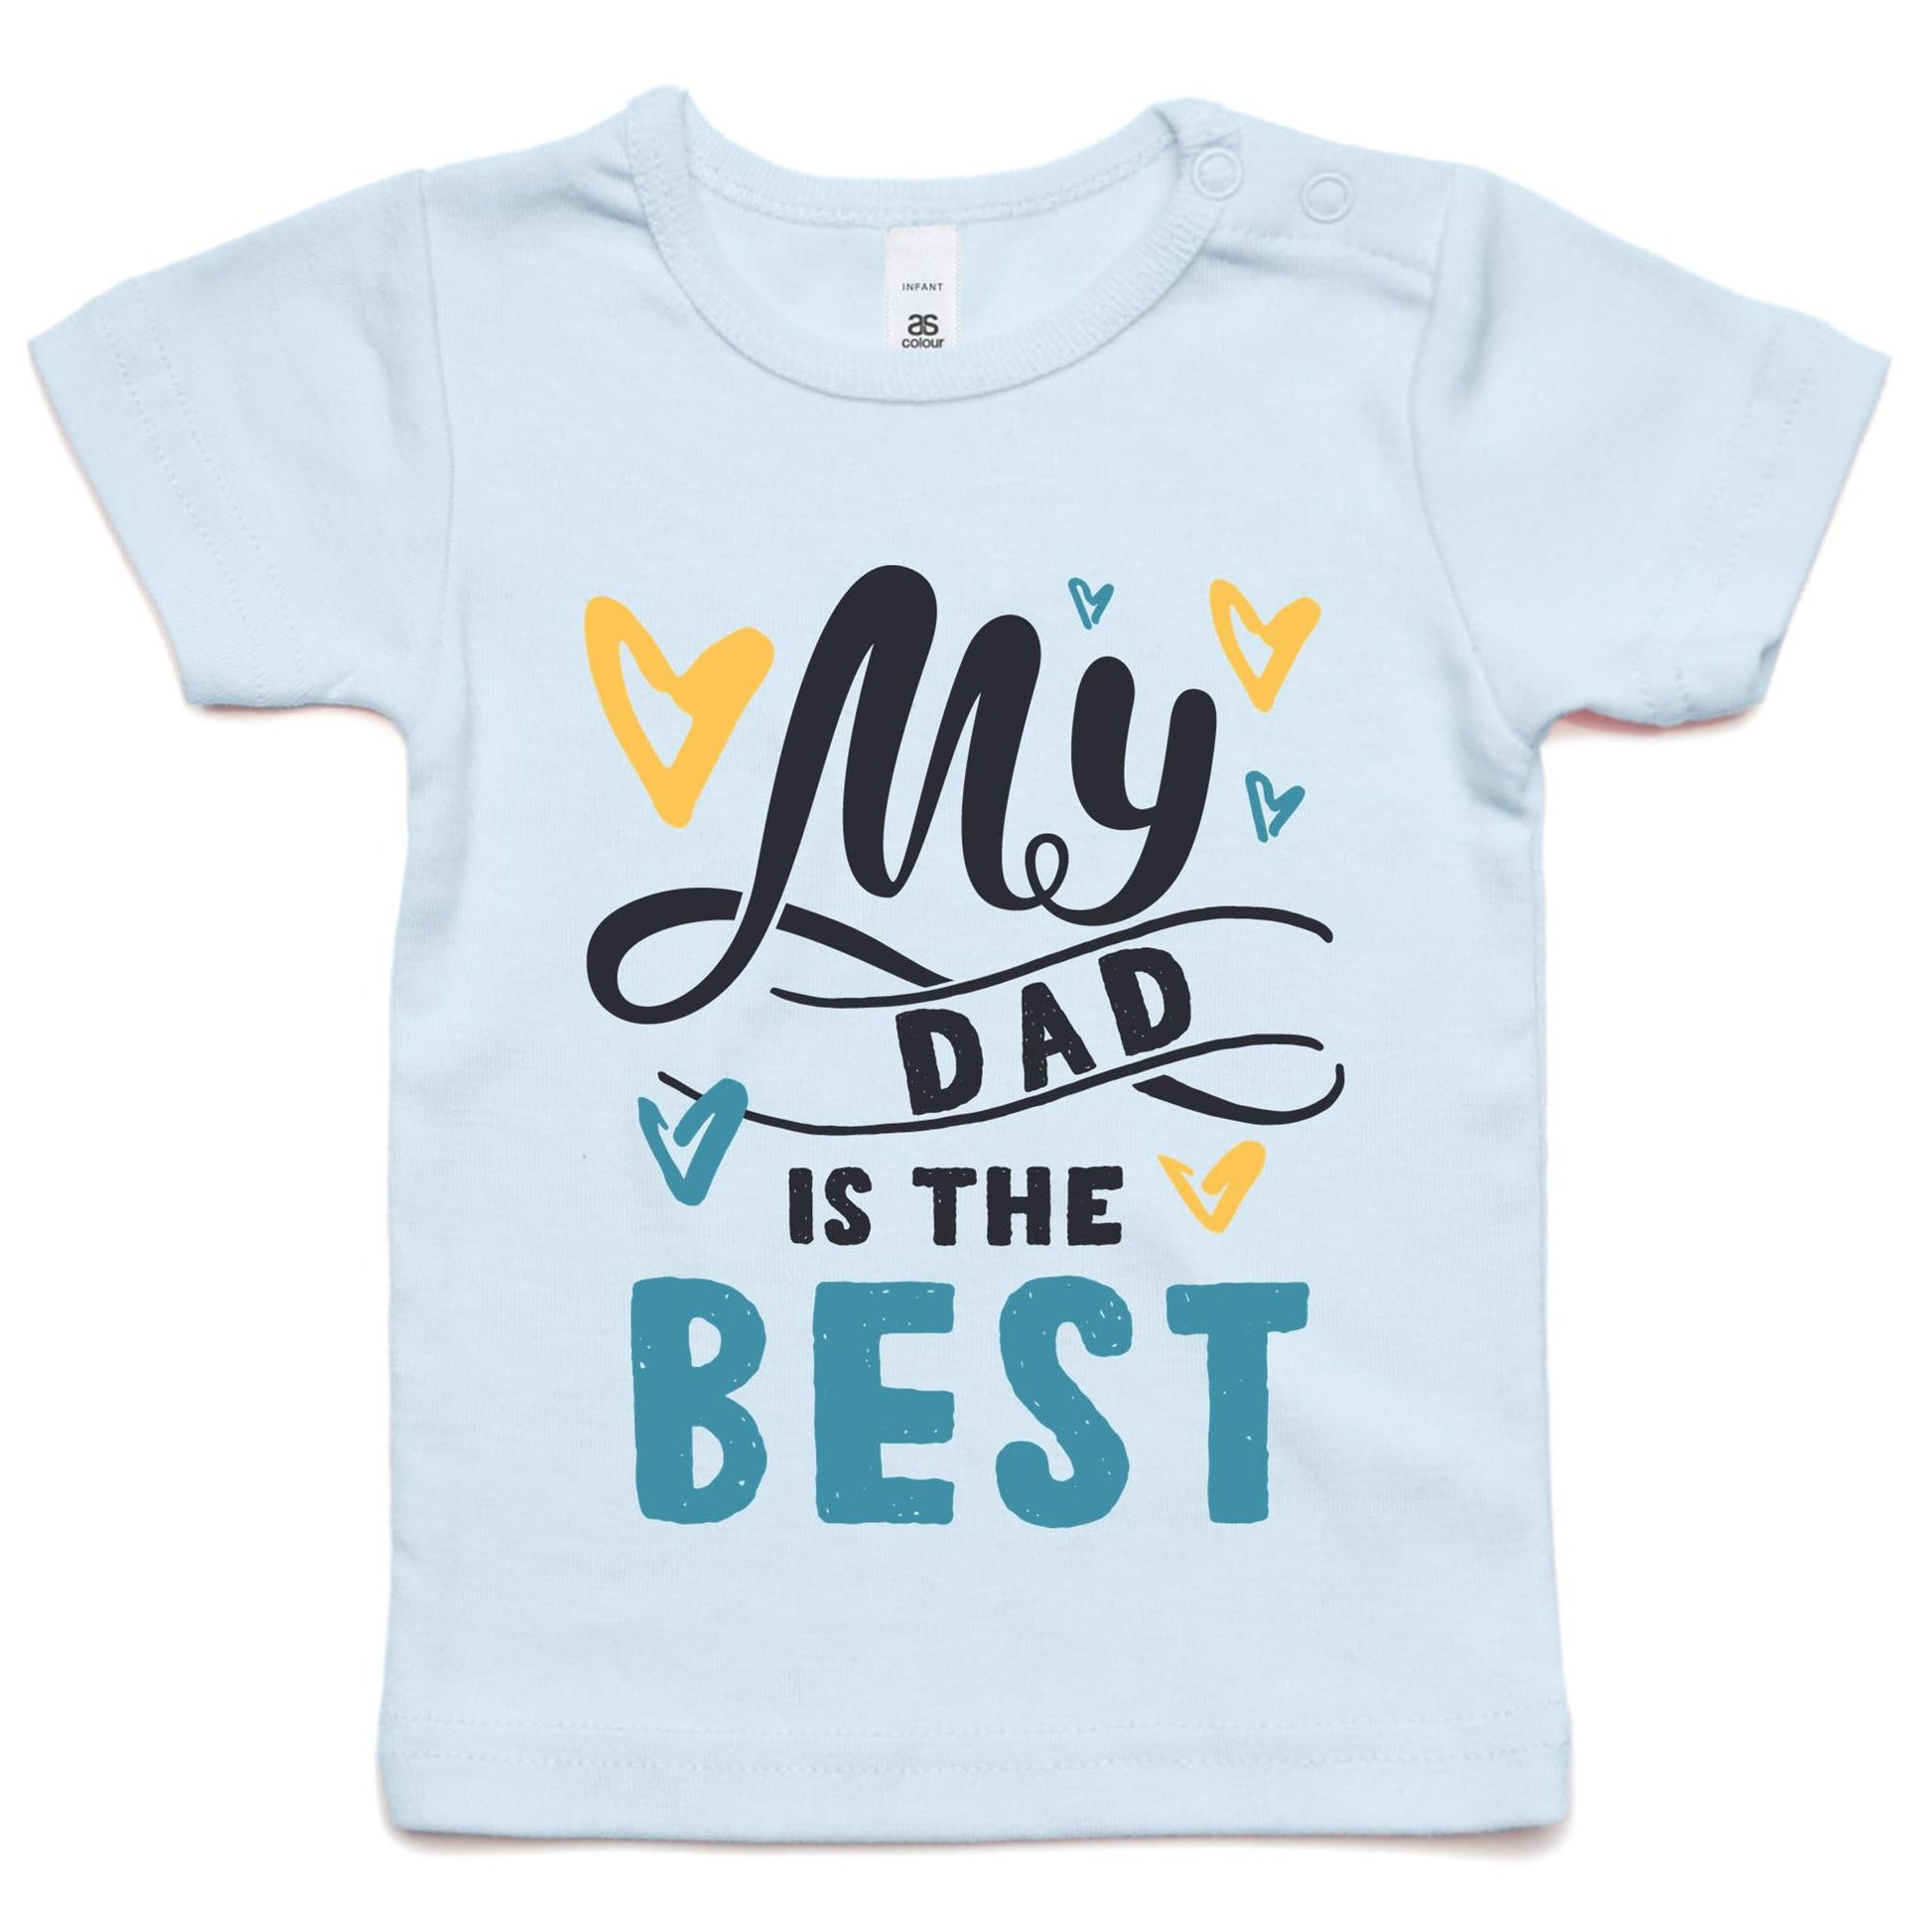 My Dad Is The Best - Baby T-shirt Powder Blue Baby T-shirt Dad